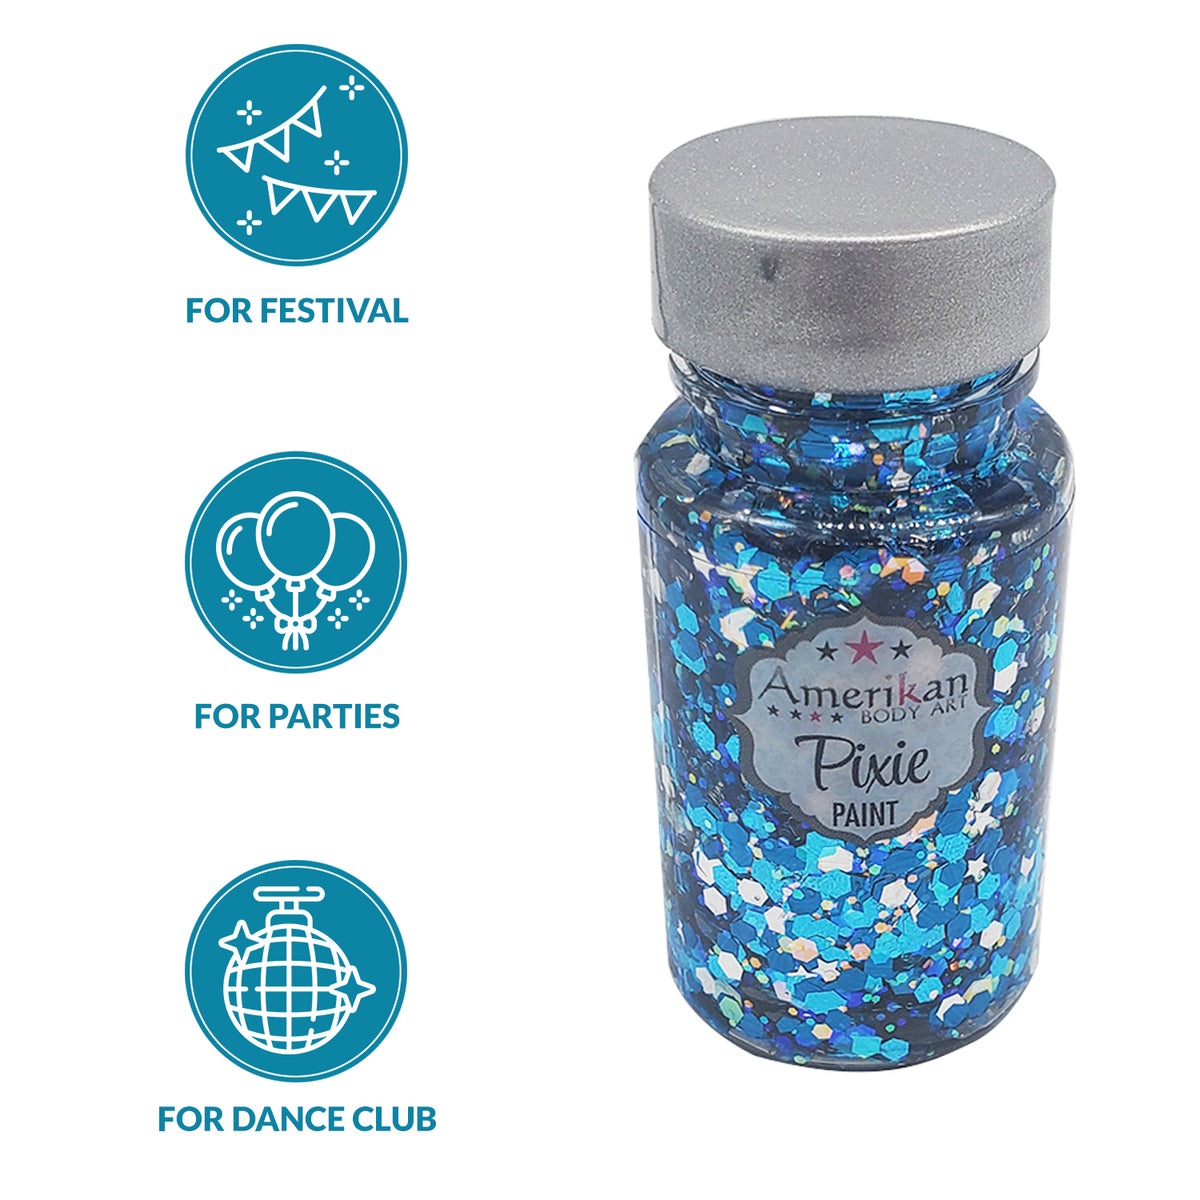 Pixie Paint Glitter Gel - Midnight Blue - Limited Edition Party Size 1.3 oz